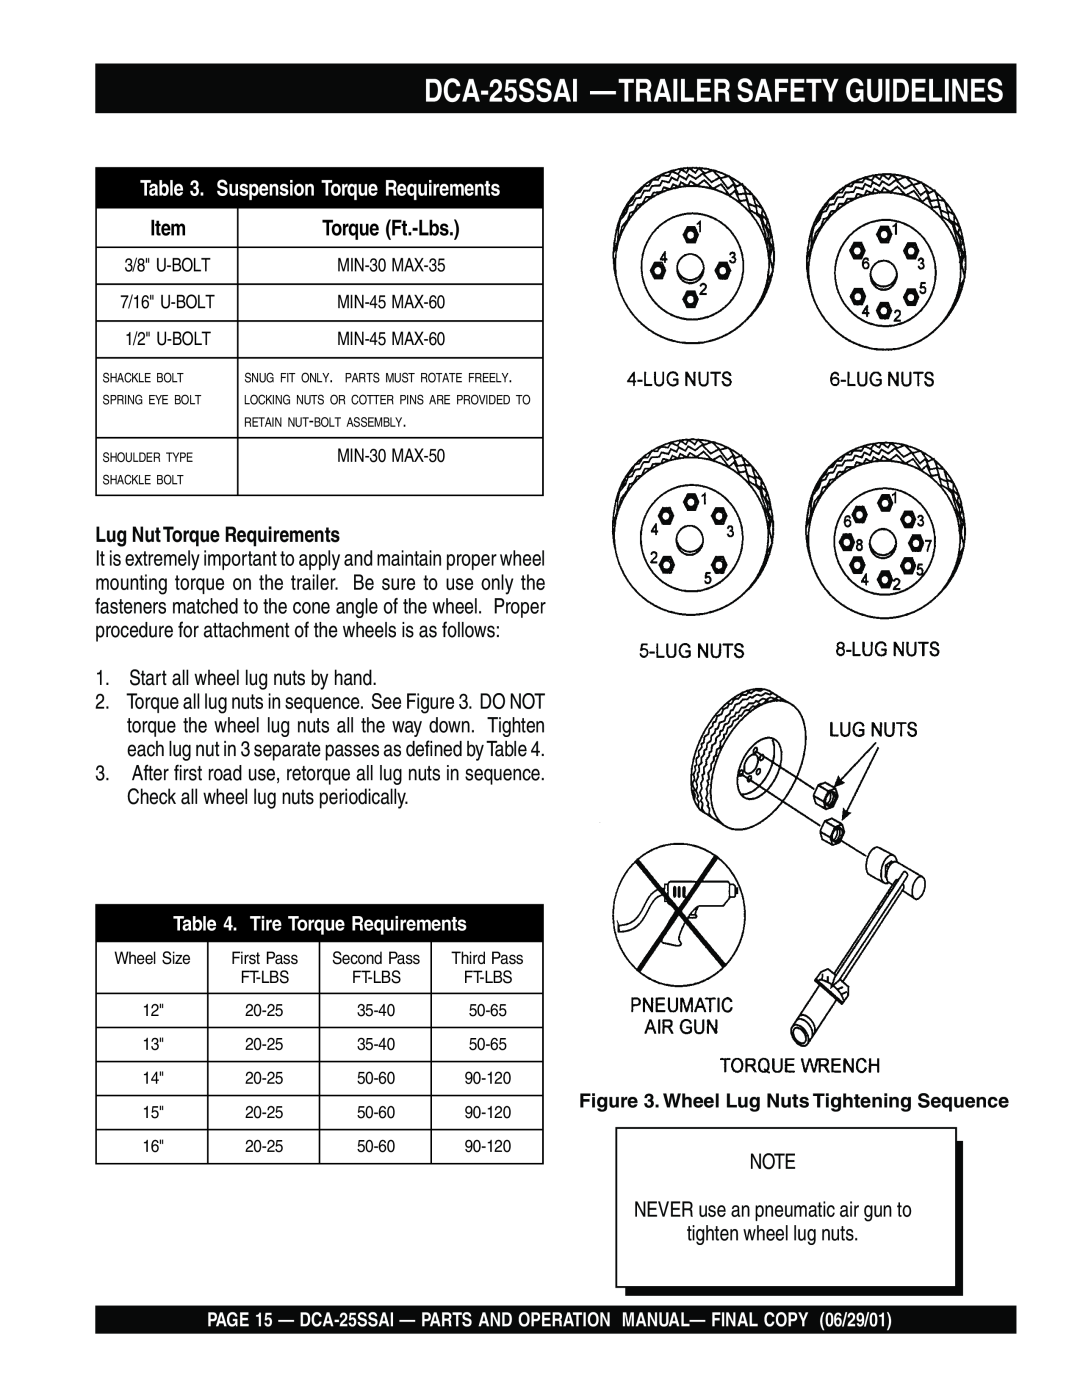 Multiquip DCA-25SSAI -TRAILER SAFETY GUIDELINES, Torque Ft.-Lbs, Lug Nut Torque Requirements, Tire Torque Requirements 